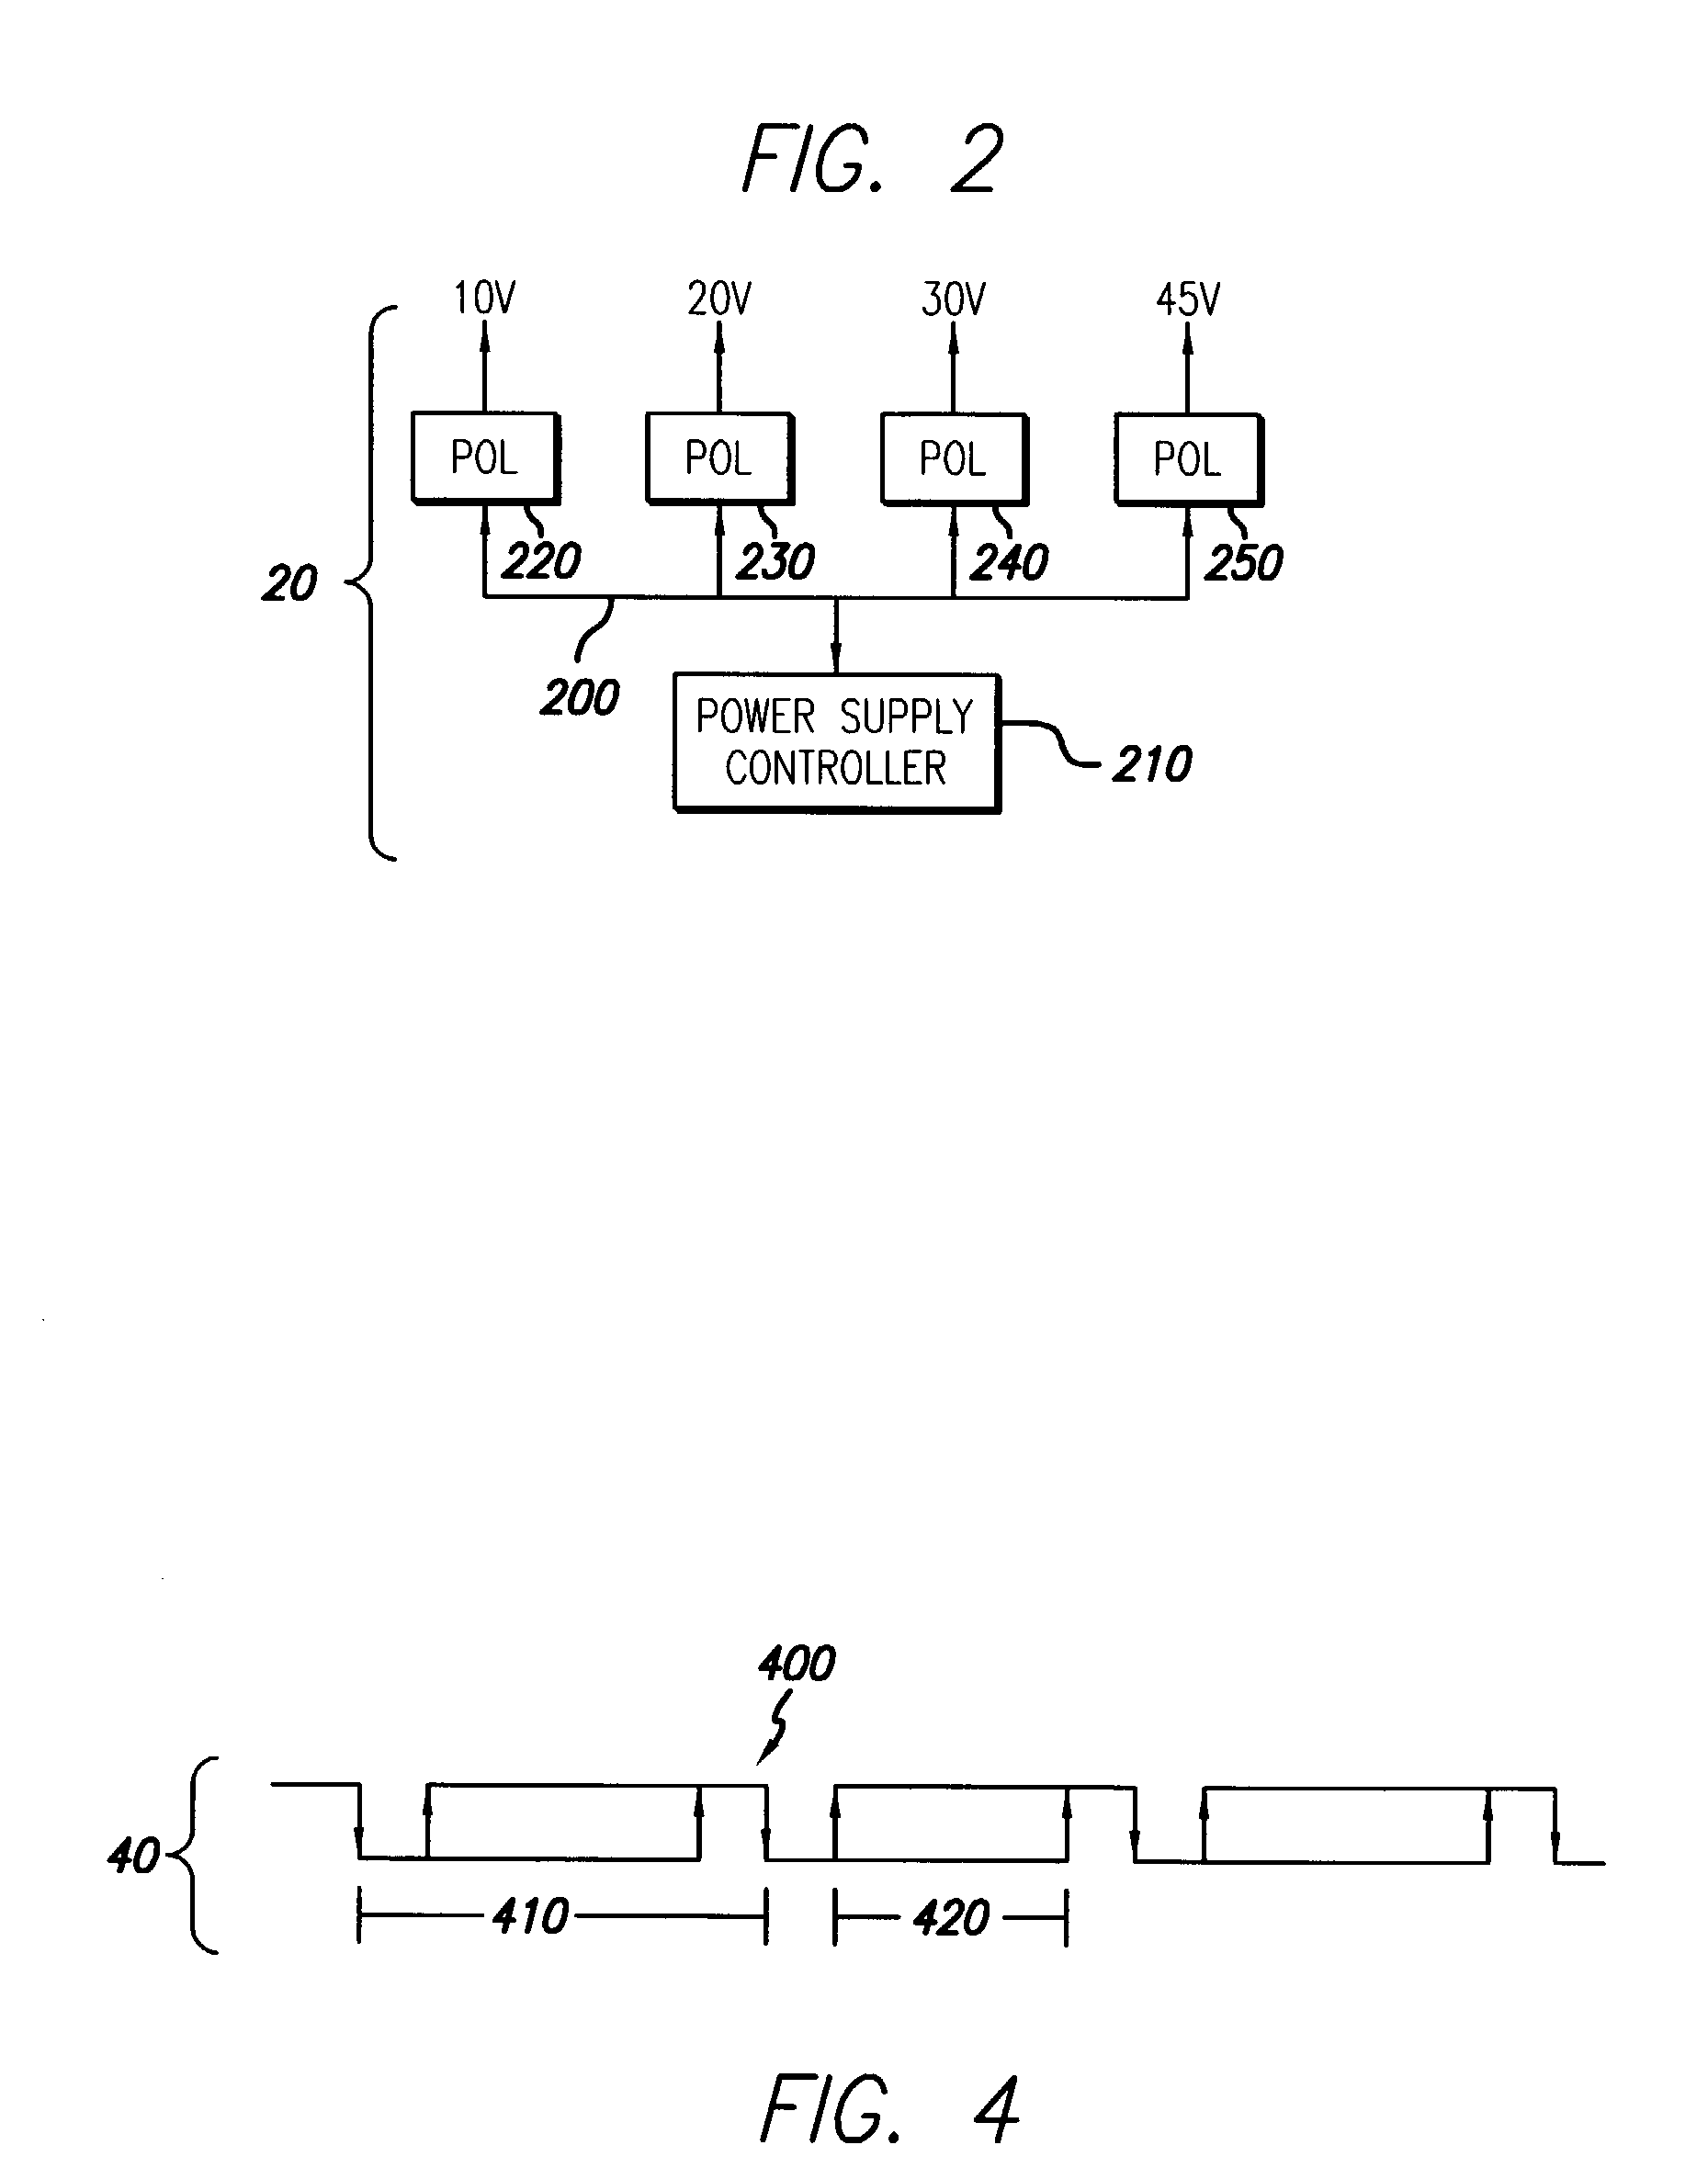 System and method for communicating with a voltage regulator